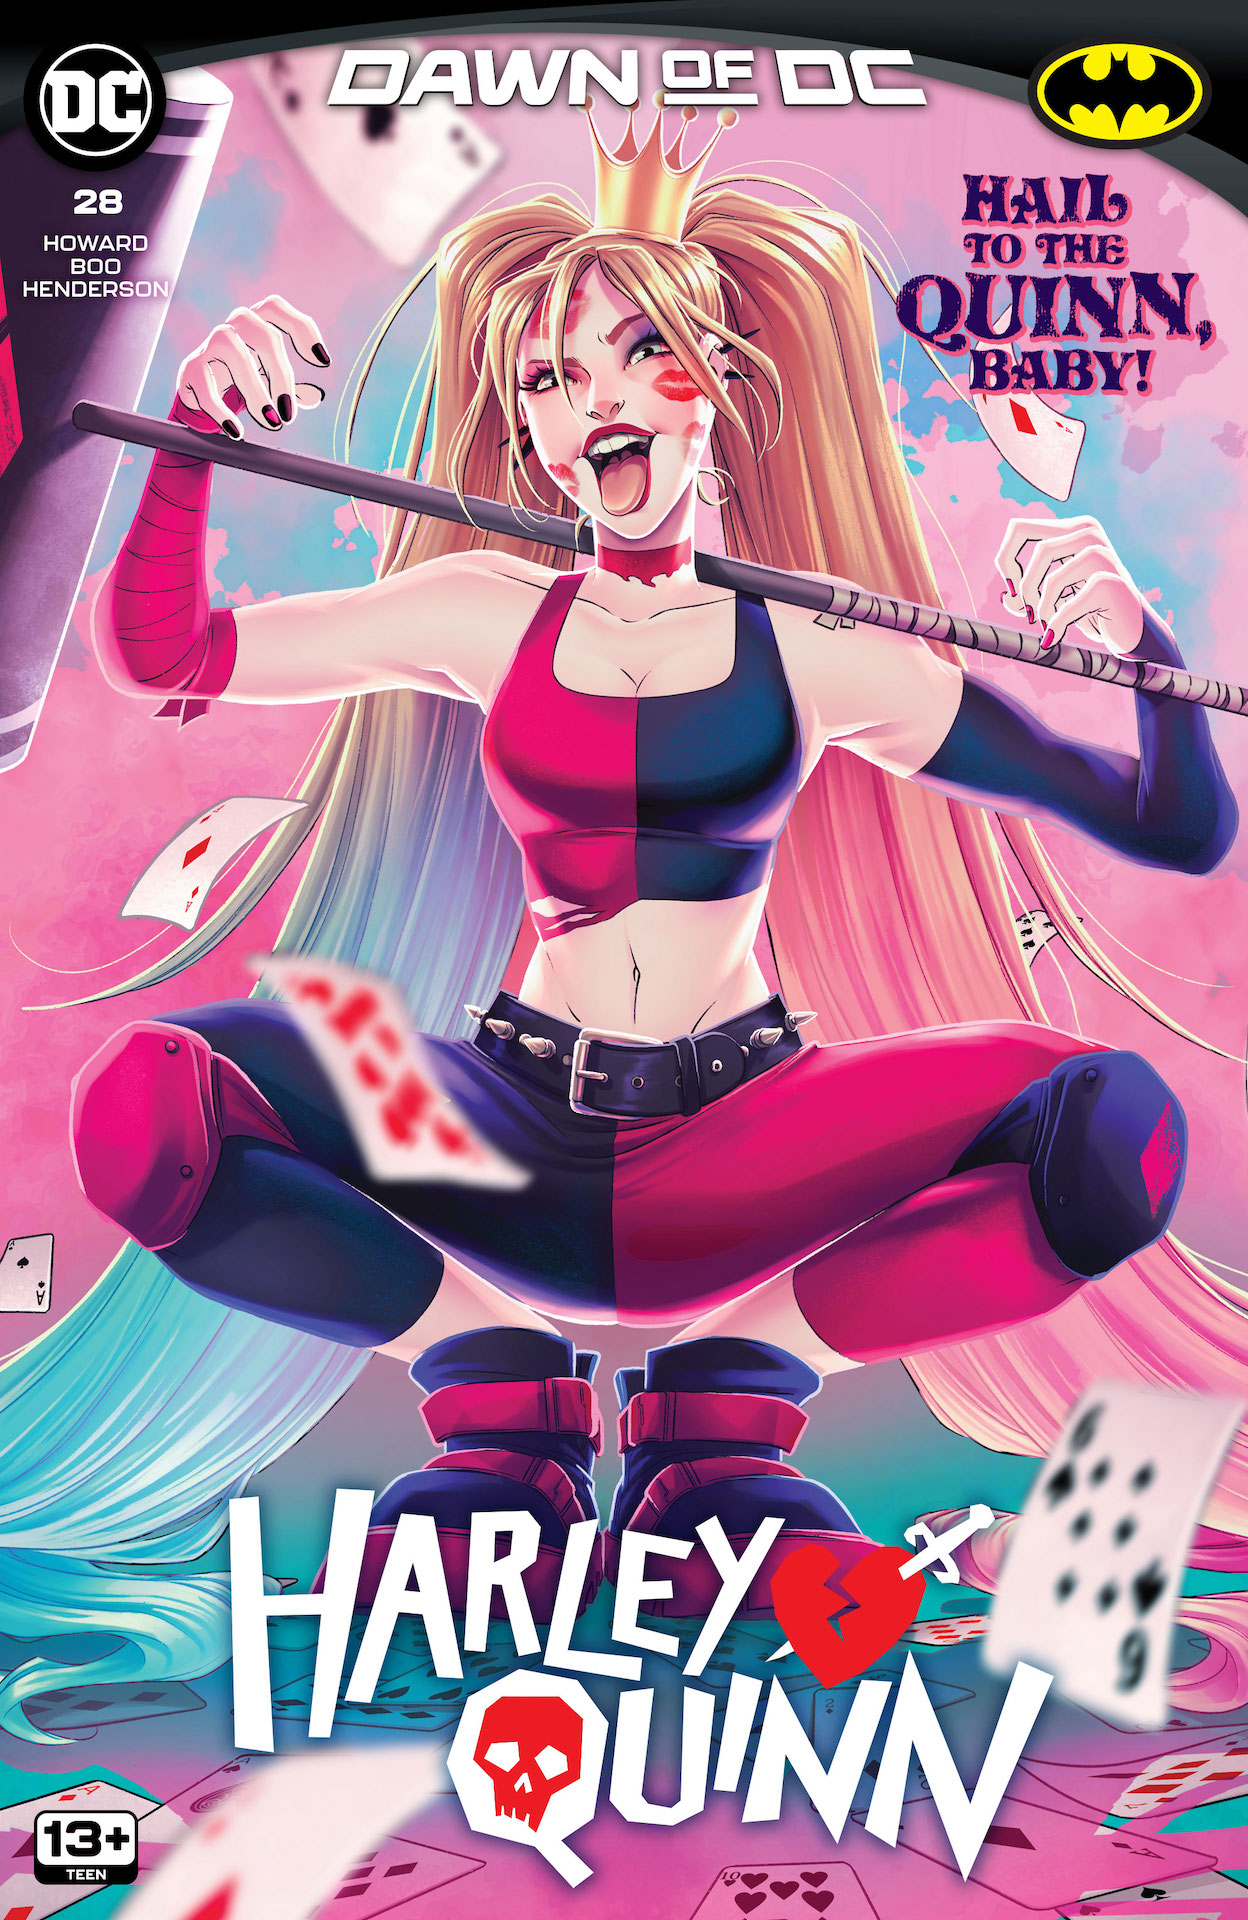 DC Preview: Harley Quinn #28